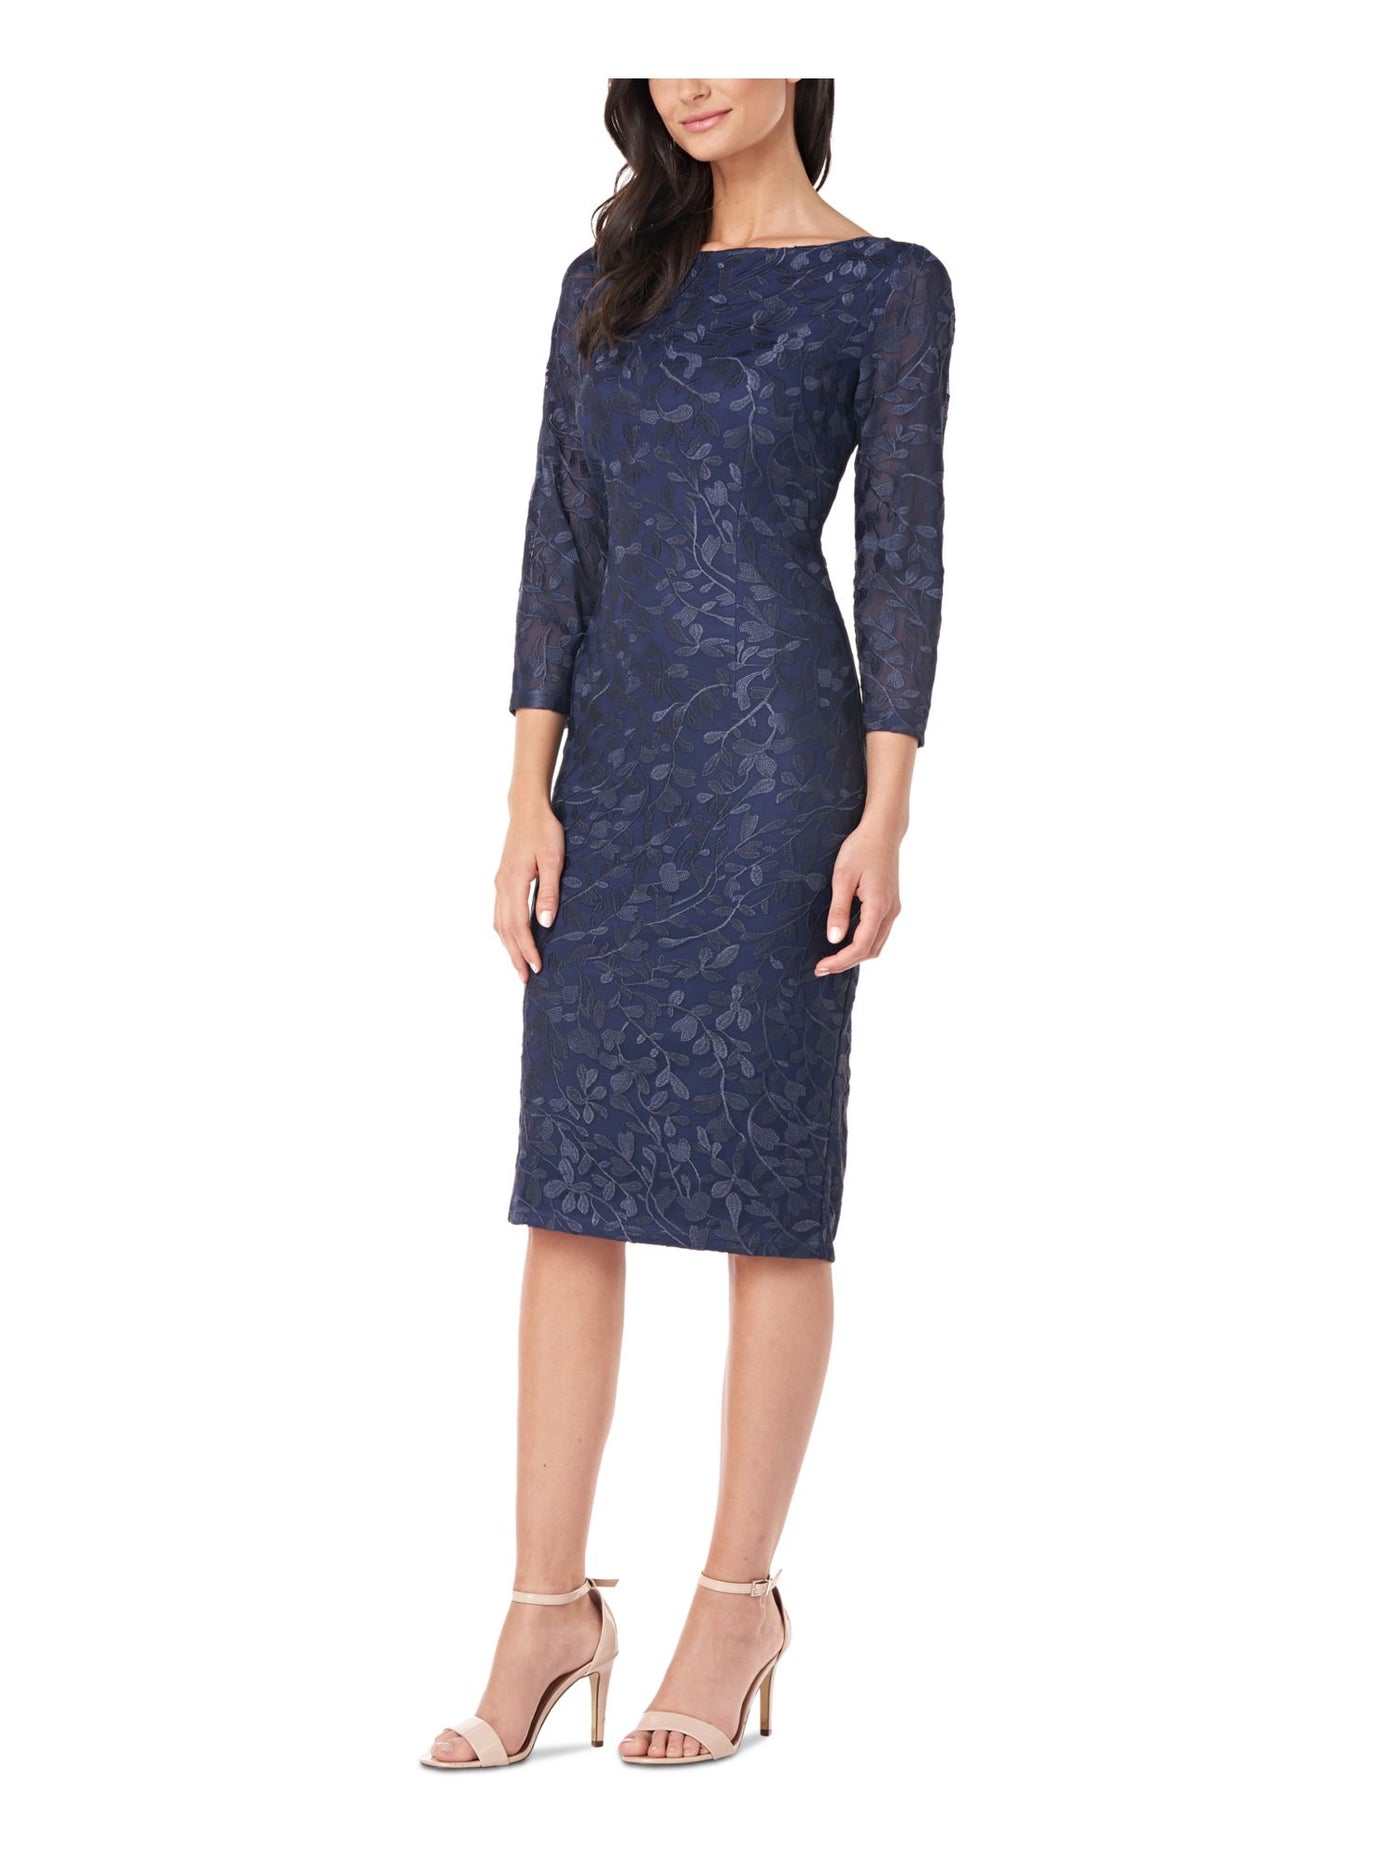 JS COLLECTION Womens Embroidered Zippered 3/4 Sleeve Boat Neck Below The Knee Evening Sheath Dress